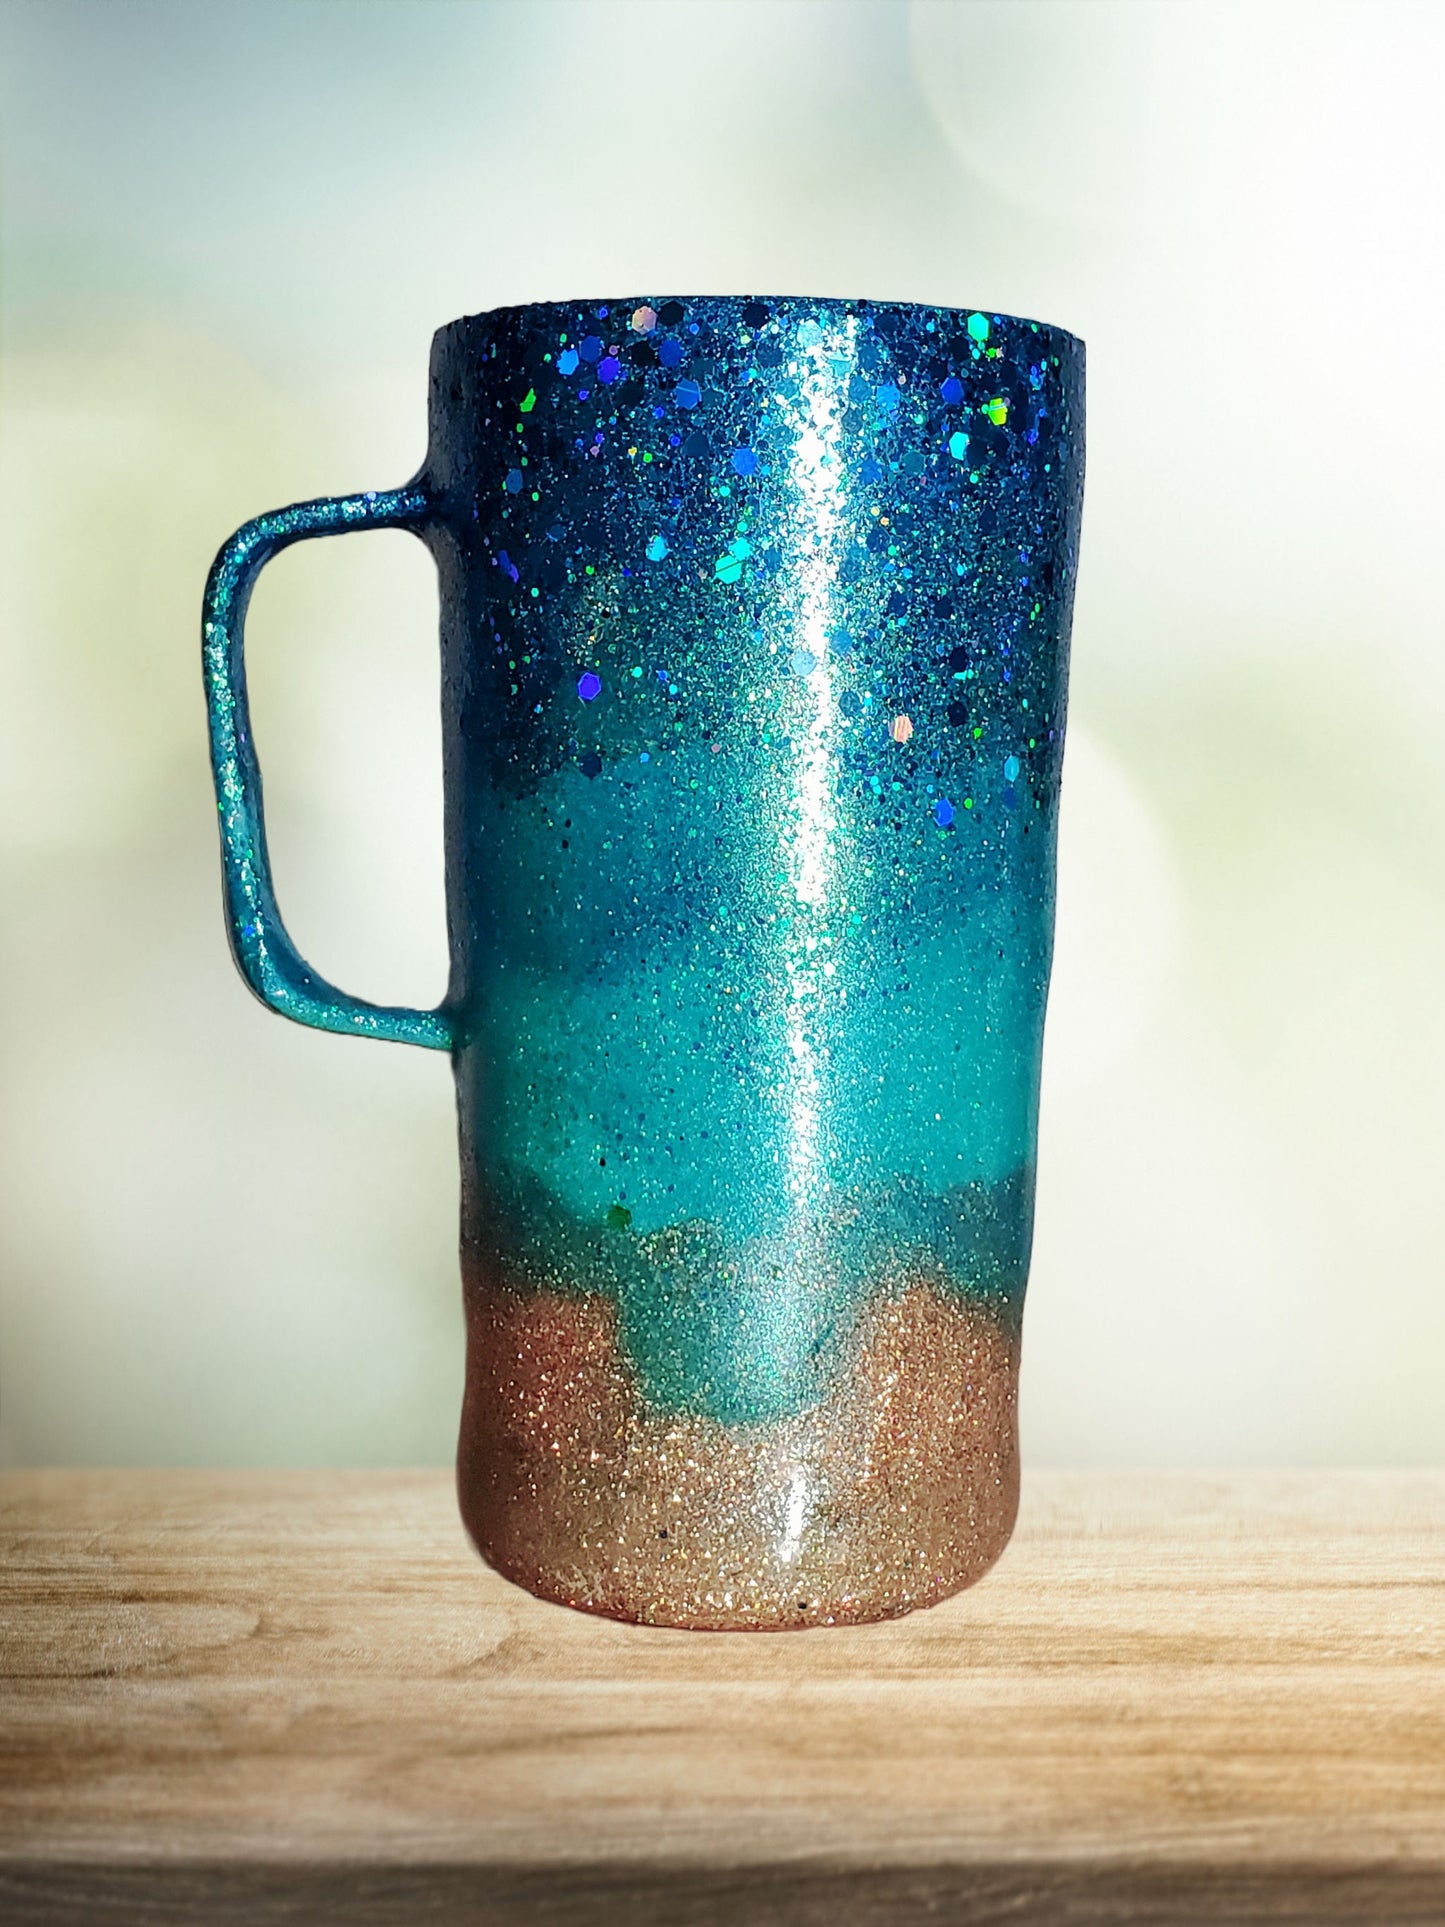 You Personalize Spillproof Aqua Teal Beach and Sand Ombre Glitter Tumbler Iron Flask Custom Personalized Tumbler Travel Mug